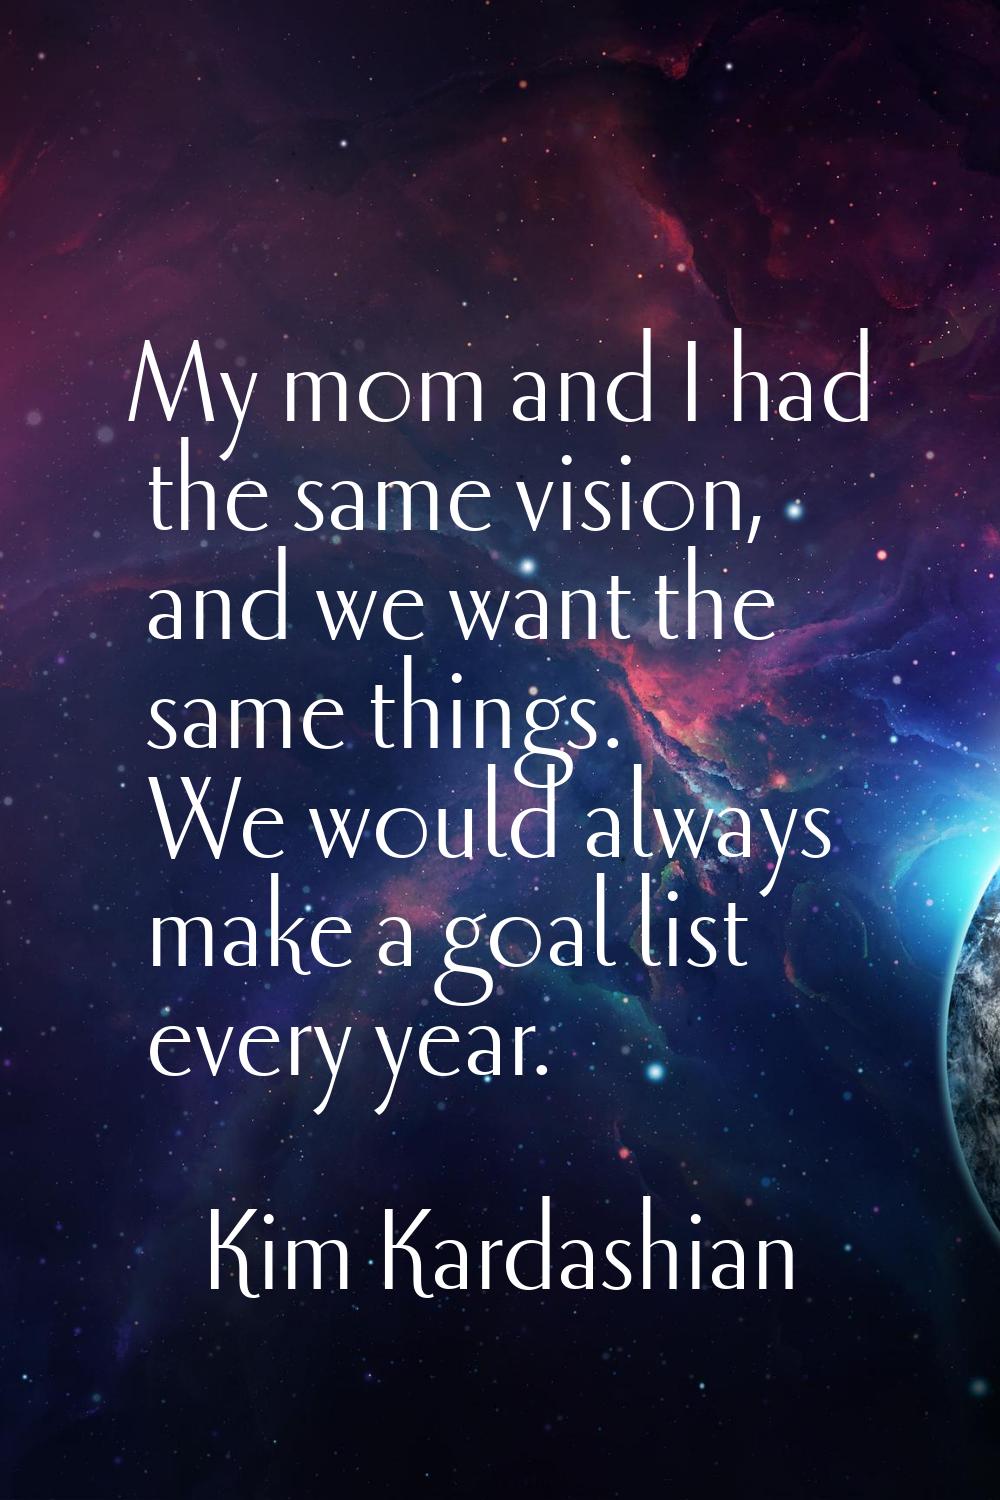 My mom and I had the same vision, and we want the same things. We would always make a goal list eve